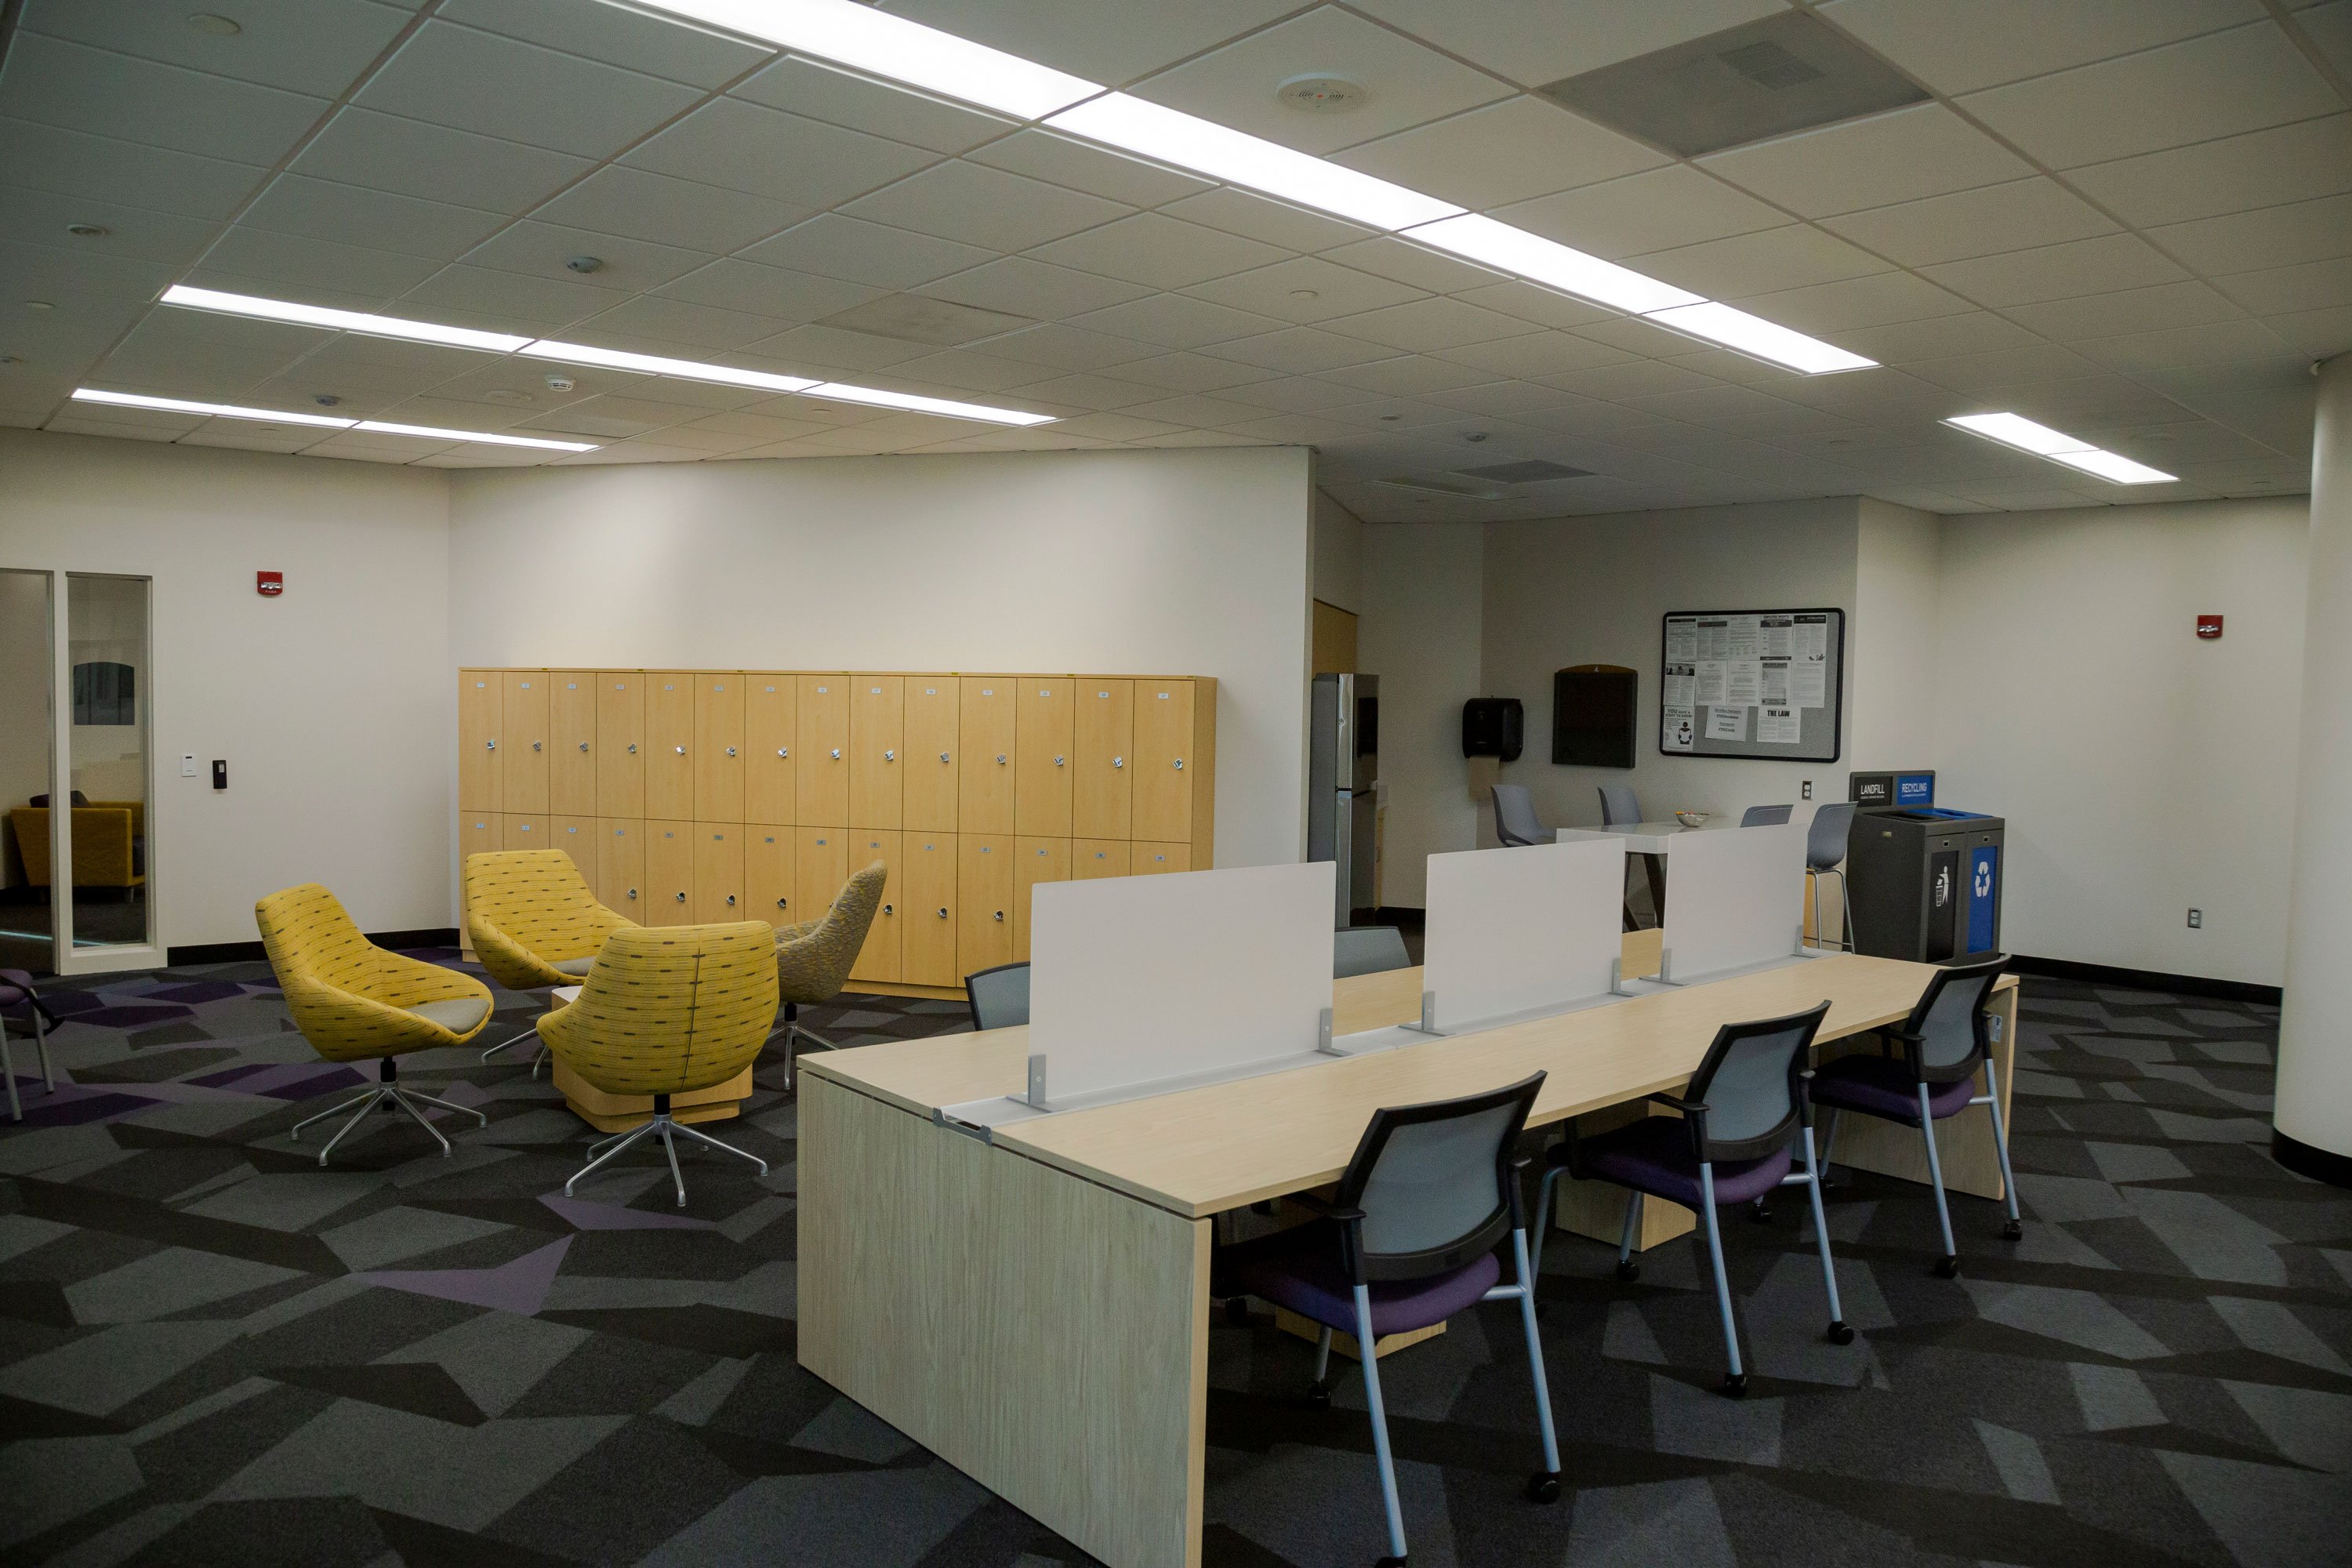 The inside of the UAlbany Innovation Center, with four yellow chairs around a coffee table, a workstation with six chairs, and a row of wooden lockers.